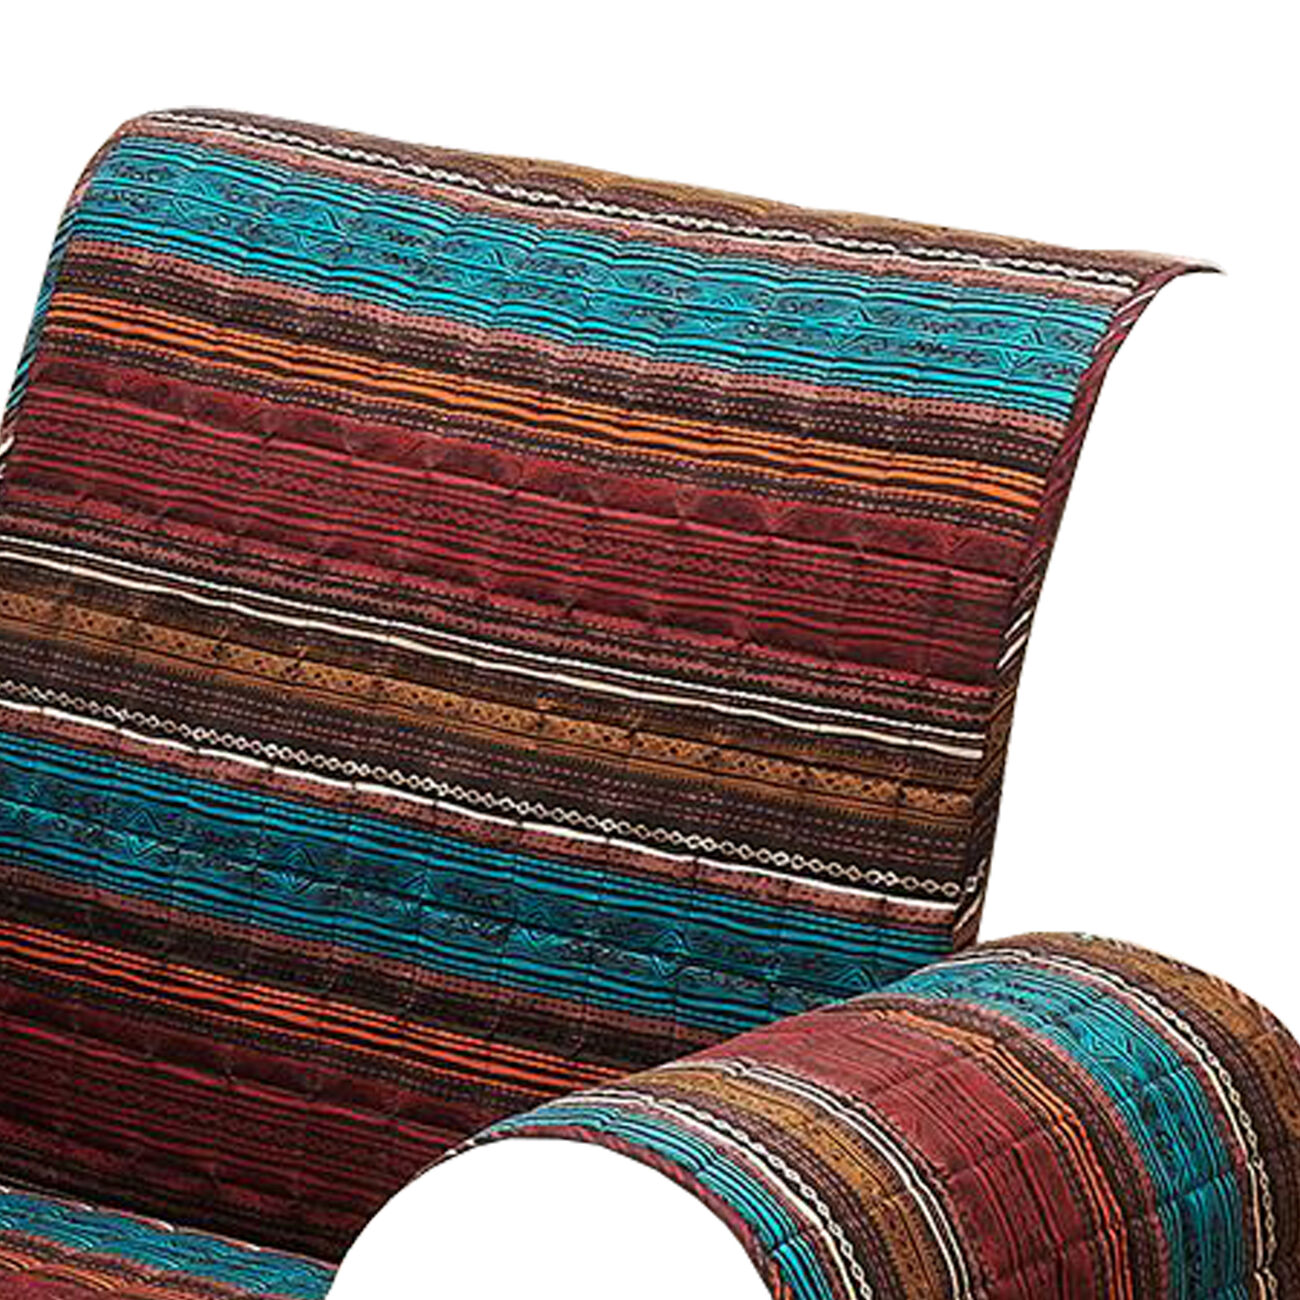 Oka Fabric Armchair Protector with Striped Pattern, Orange and Brown